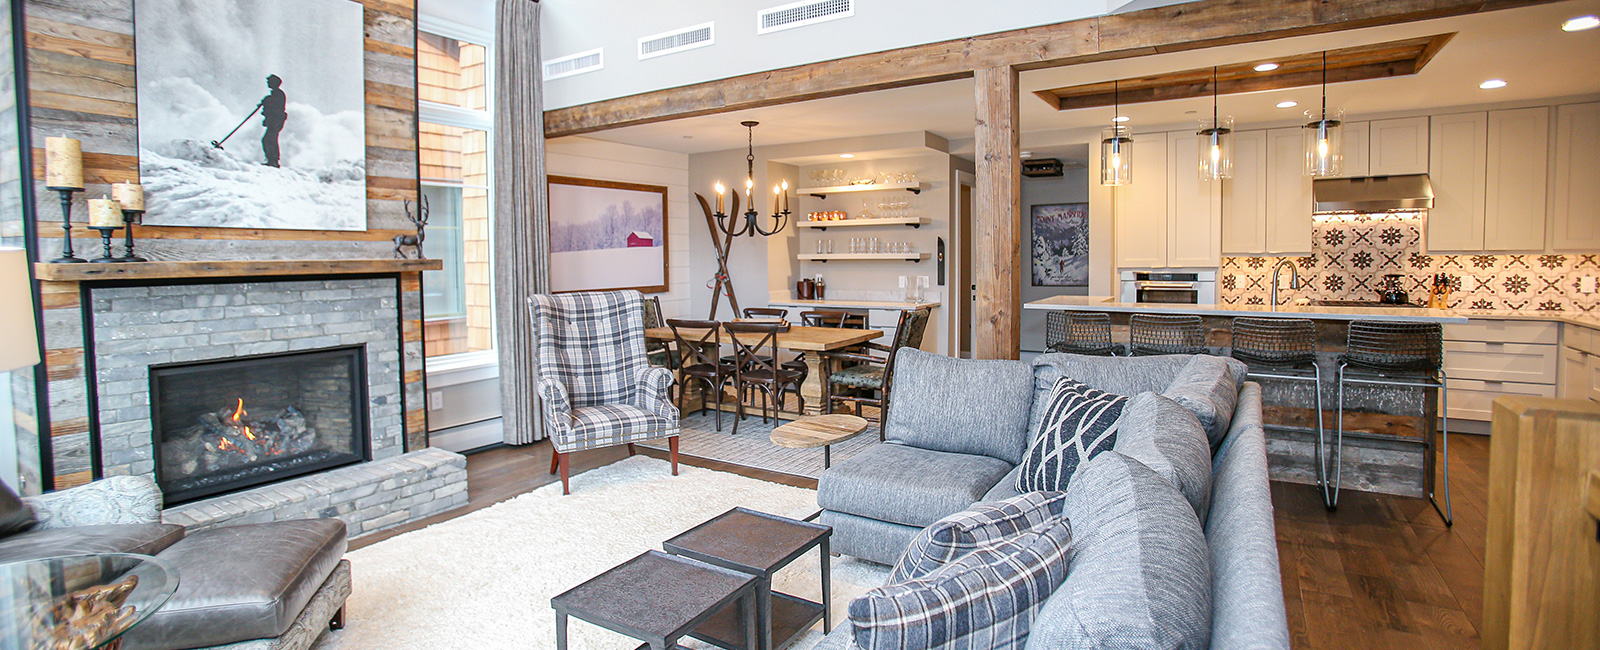 The modern and elegant Village Townhomes, located just 50 yards from the ski school and adventure center, provide convenient access to the renowned skiing at Stowe and the Village center.